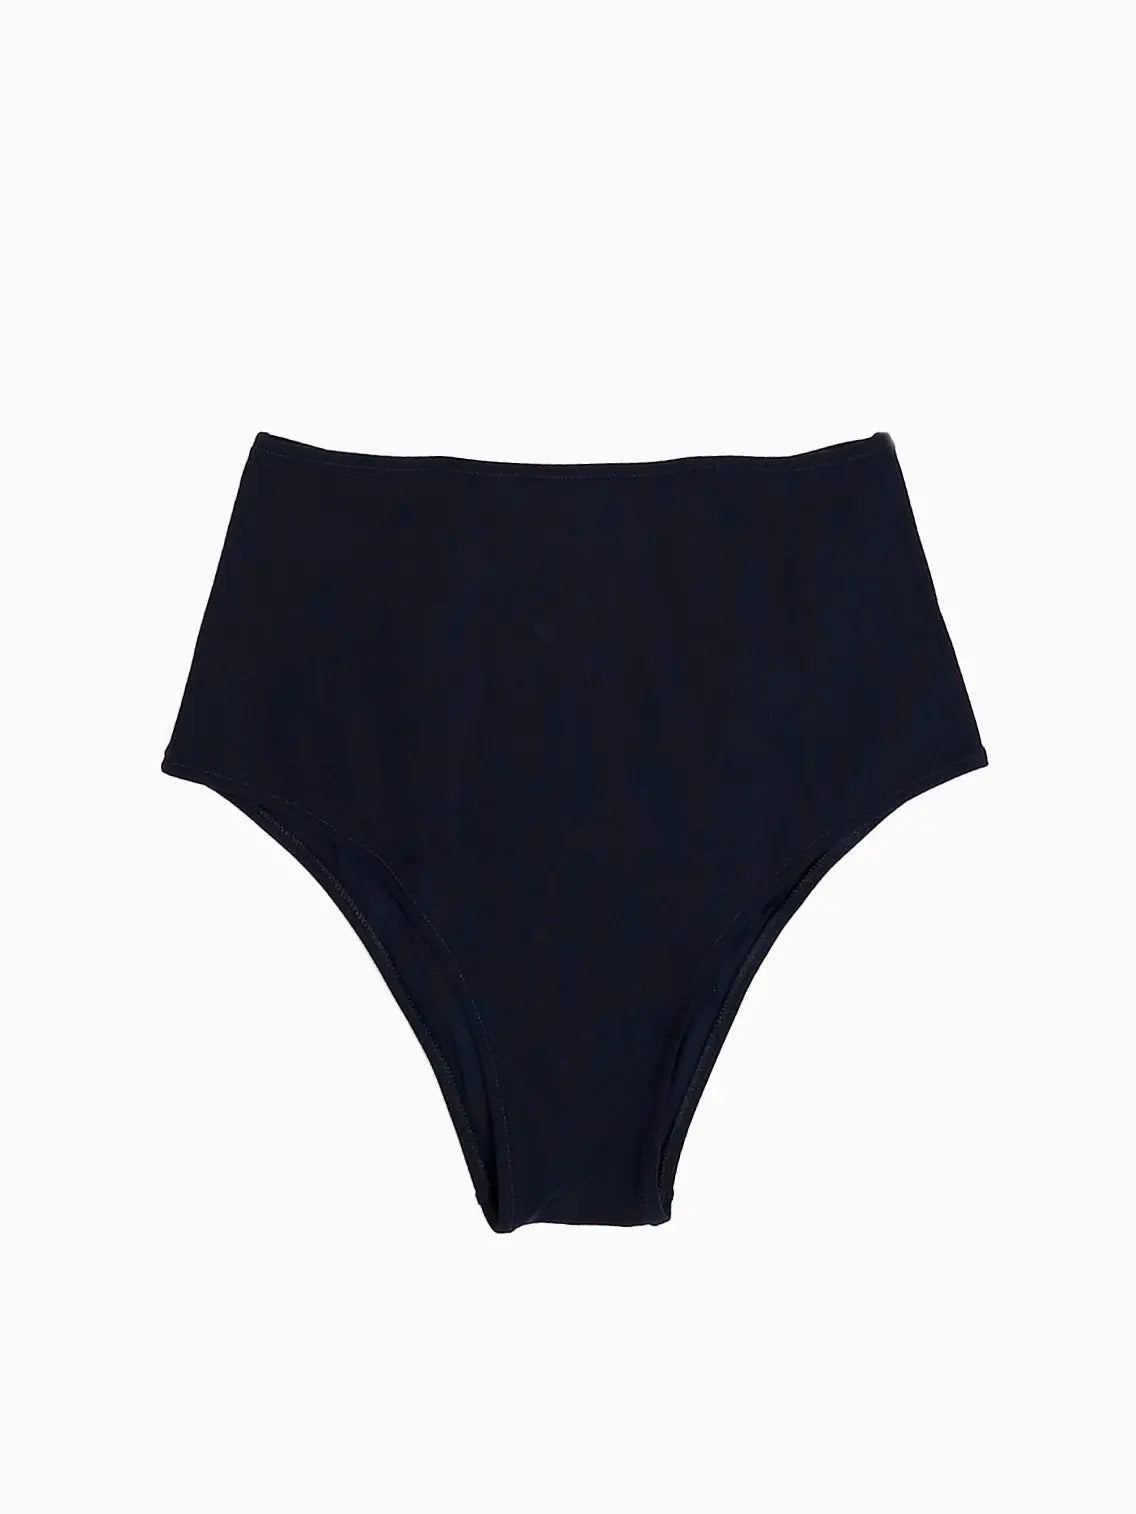 A pair of solid black, high-waisted underwear set against a plain white background. The material appears smooth and possibly stretchy, designed for a comfortable fit, available exclusively at BassalStore. This is the Undici Bikini High Waist Bottom Black by Lido.